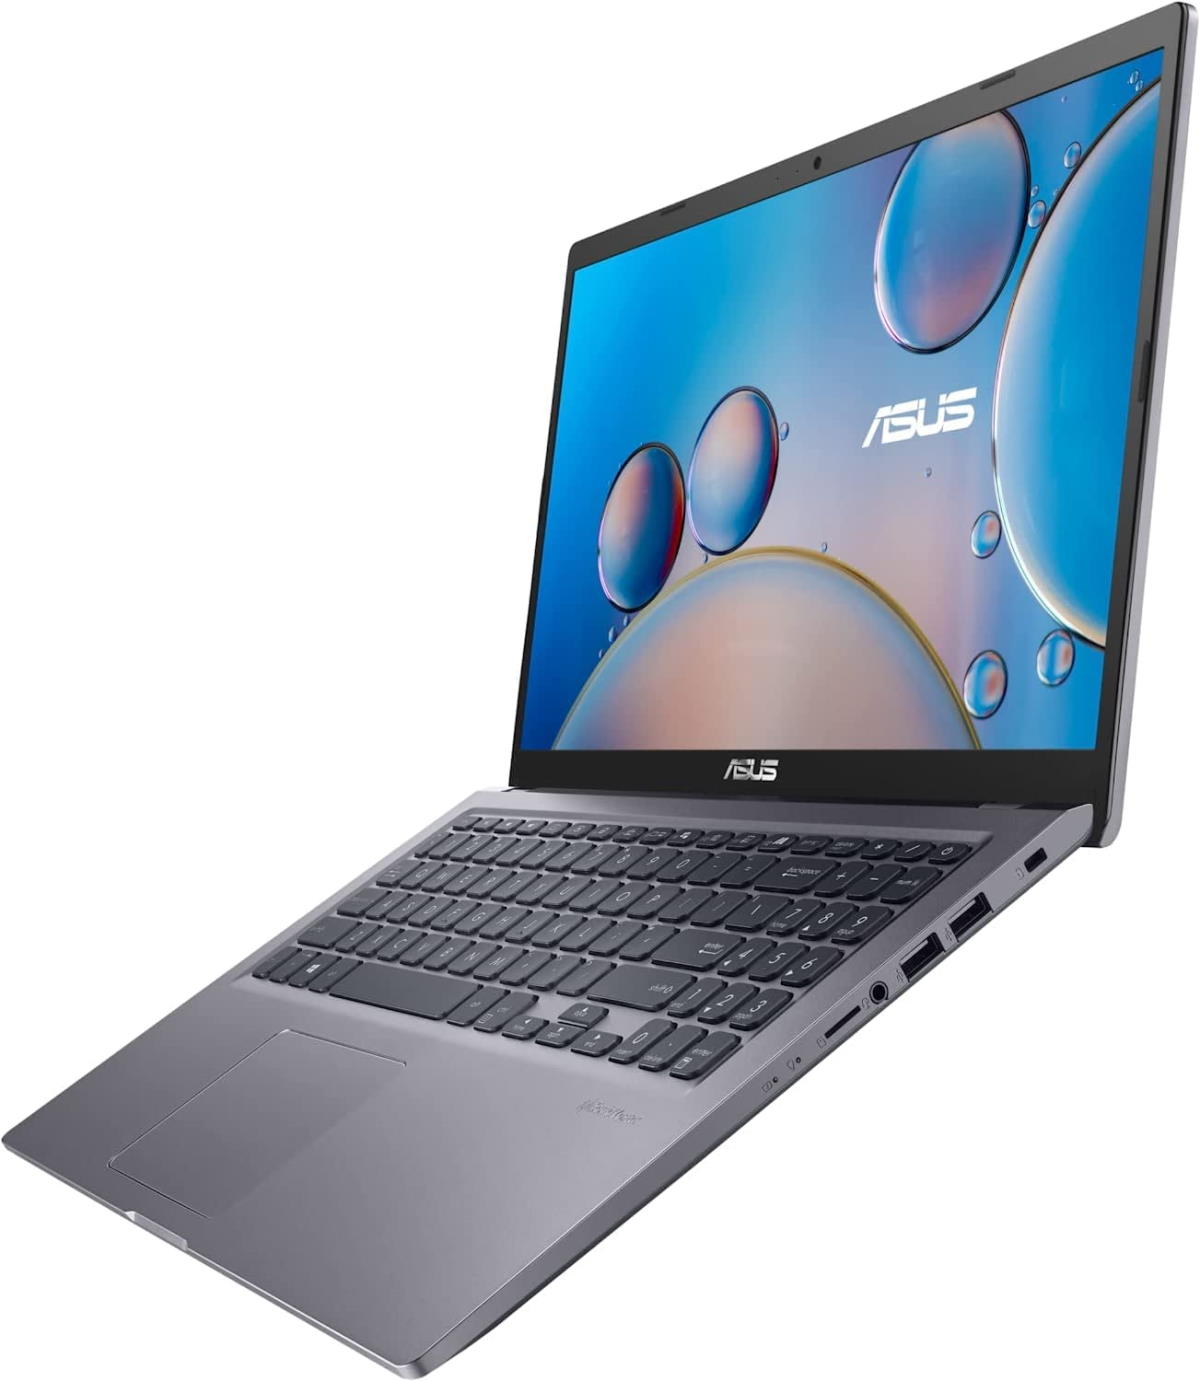 Asus VivoBook F515EA-WH52 15.6 Touch Laptop (FHD, Intel i5-1135G7, 8GB RAM, 512GB SSD)